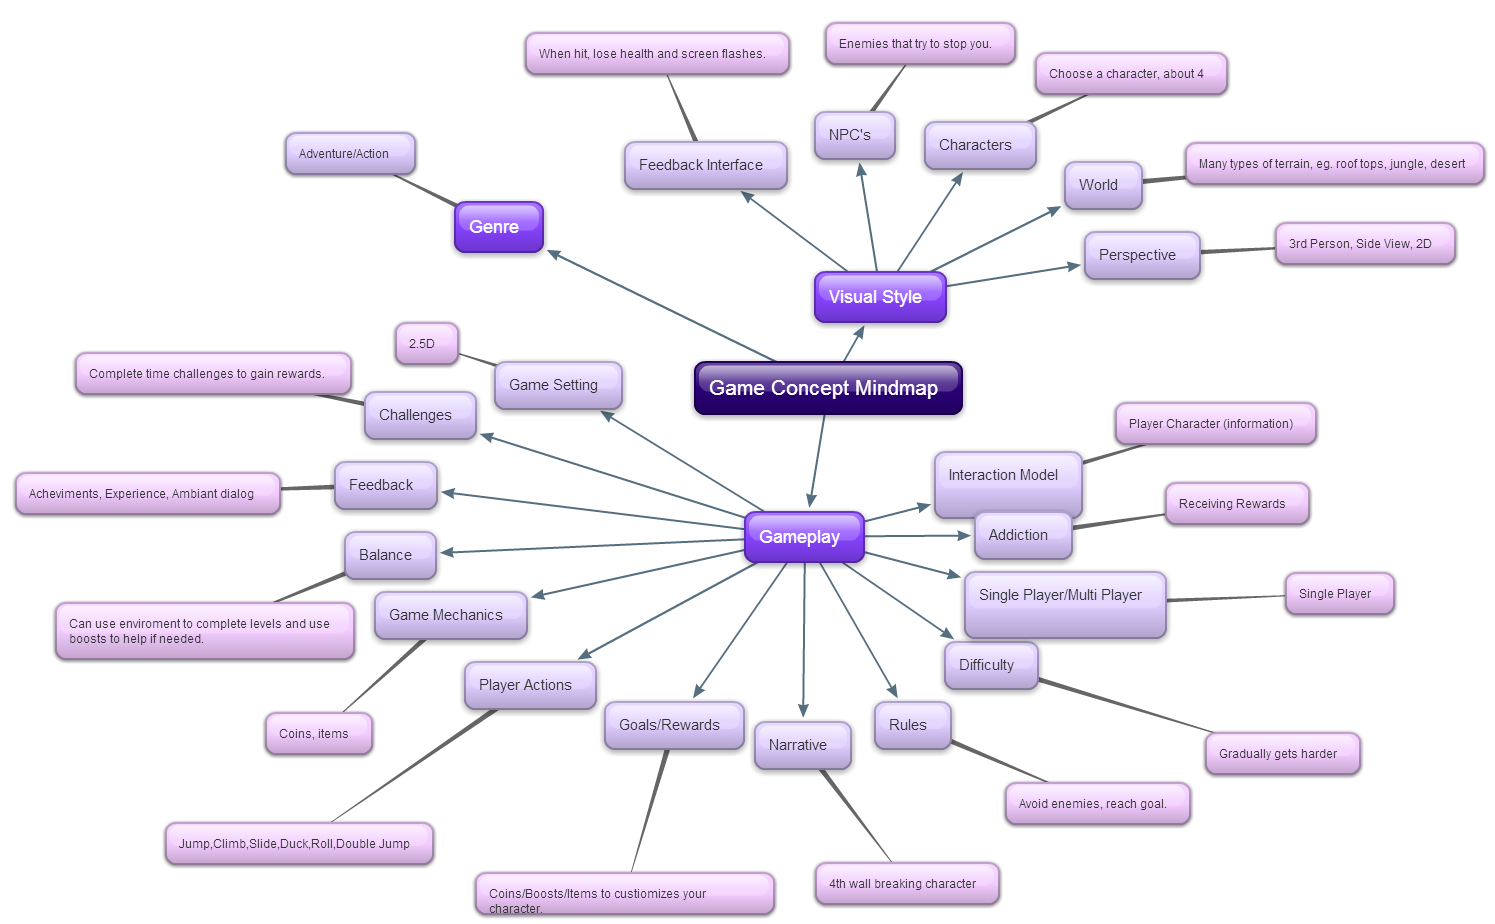 Game Concept Mindmap | ZeppelinGaming